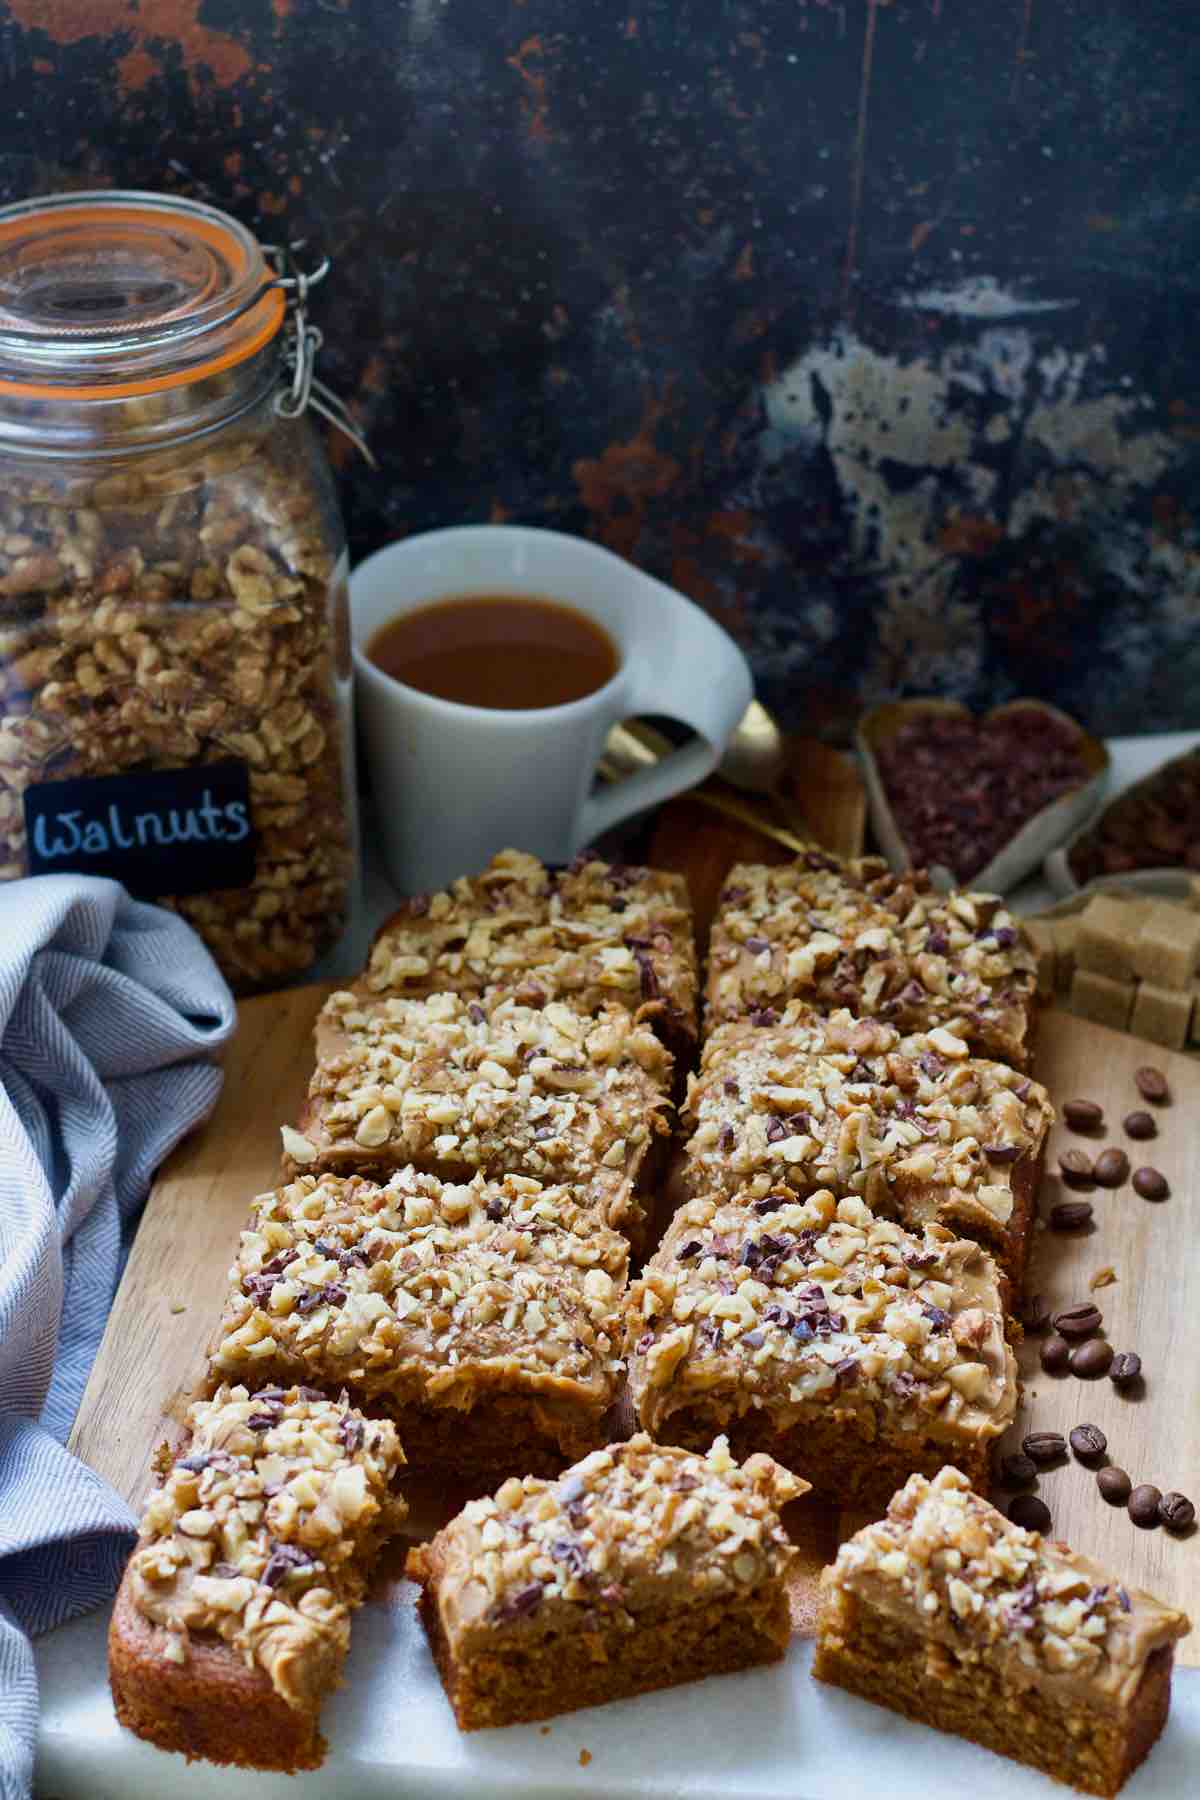 Coffee and walnut traybake portioned on the board with jar of walnuts and tea behind.